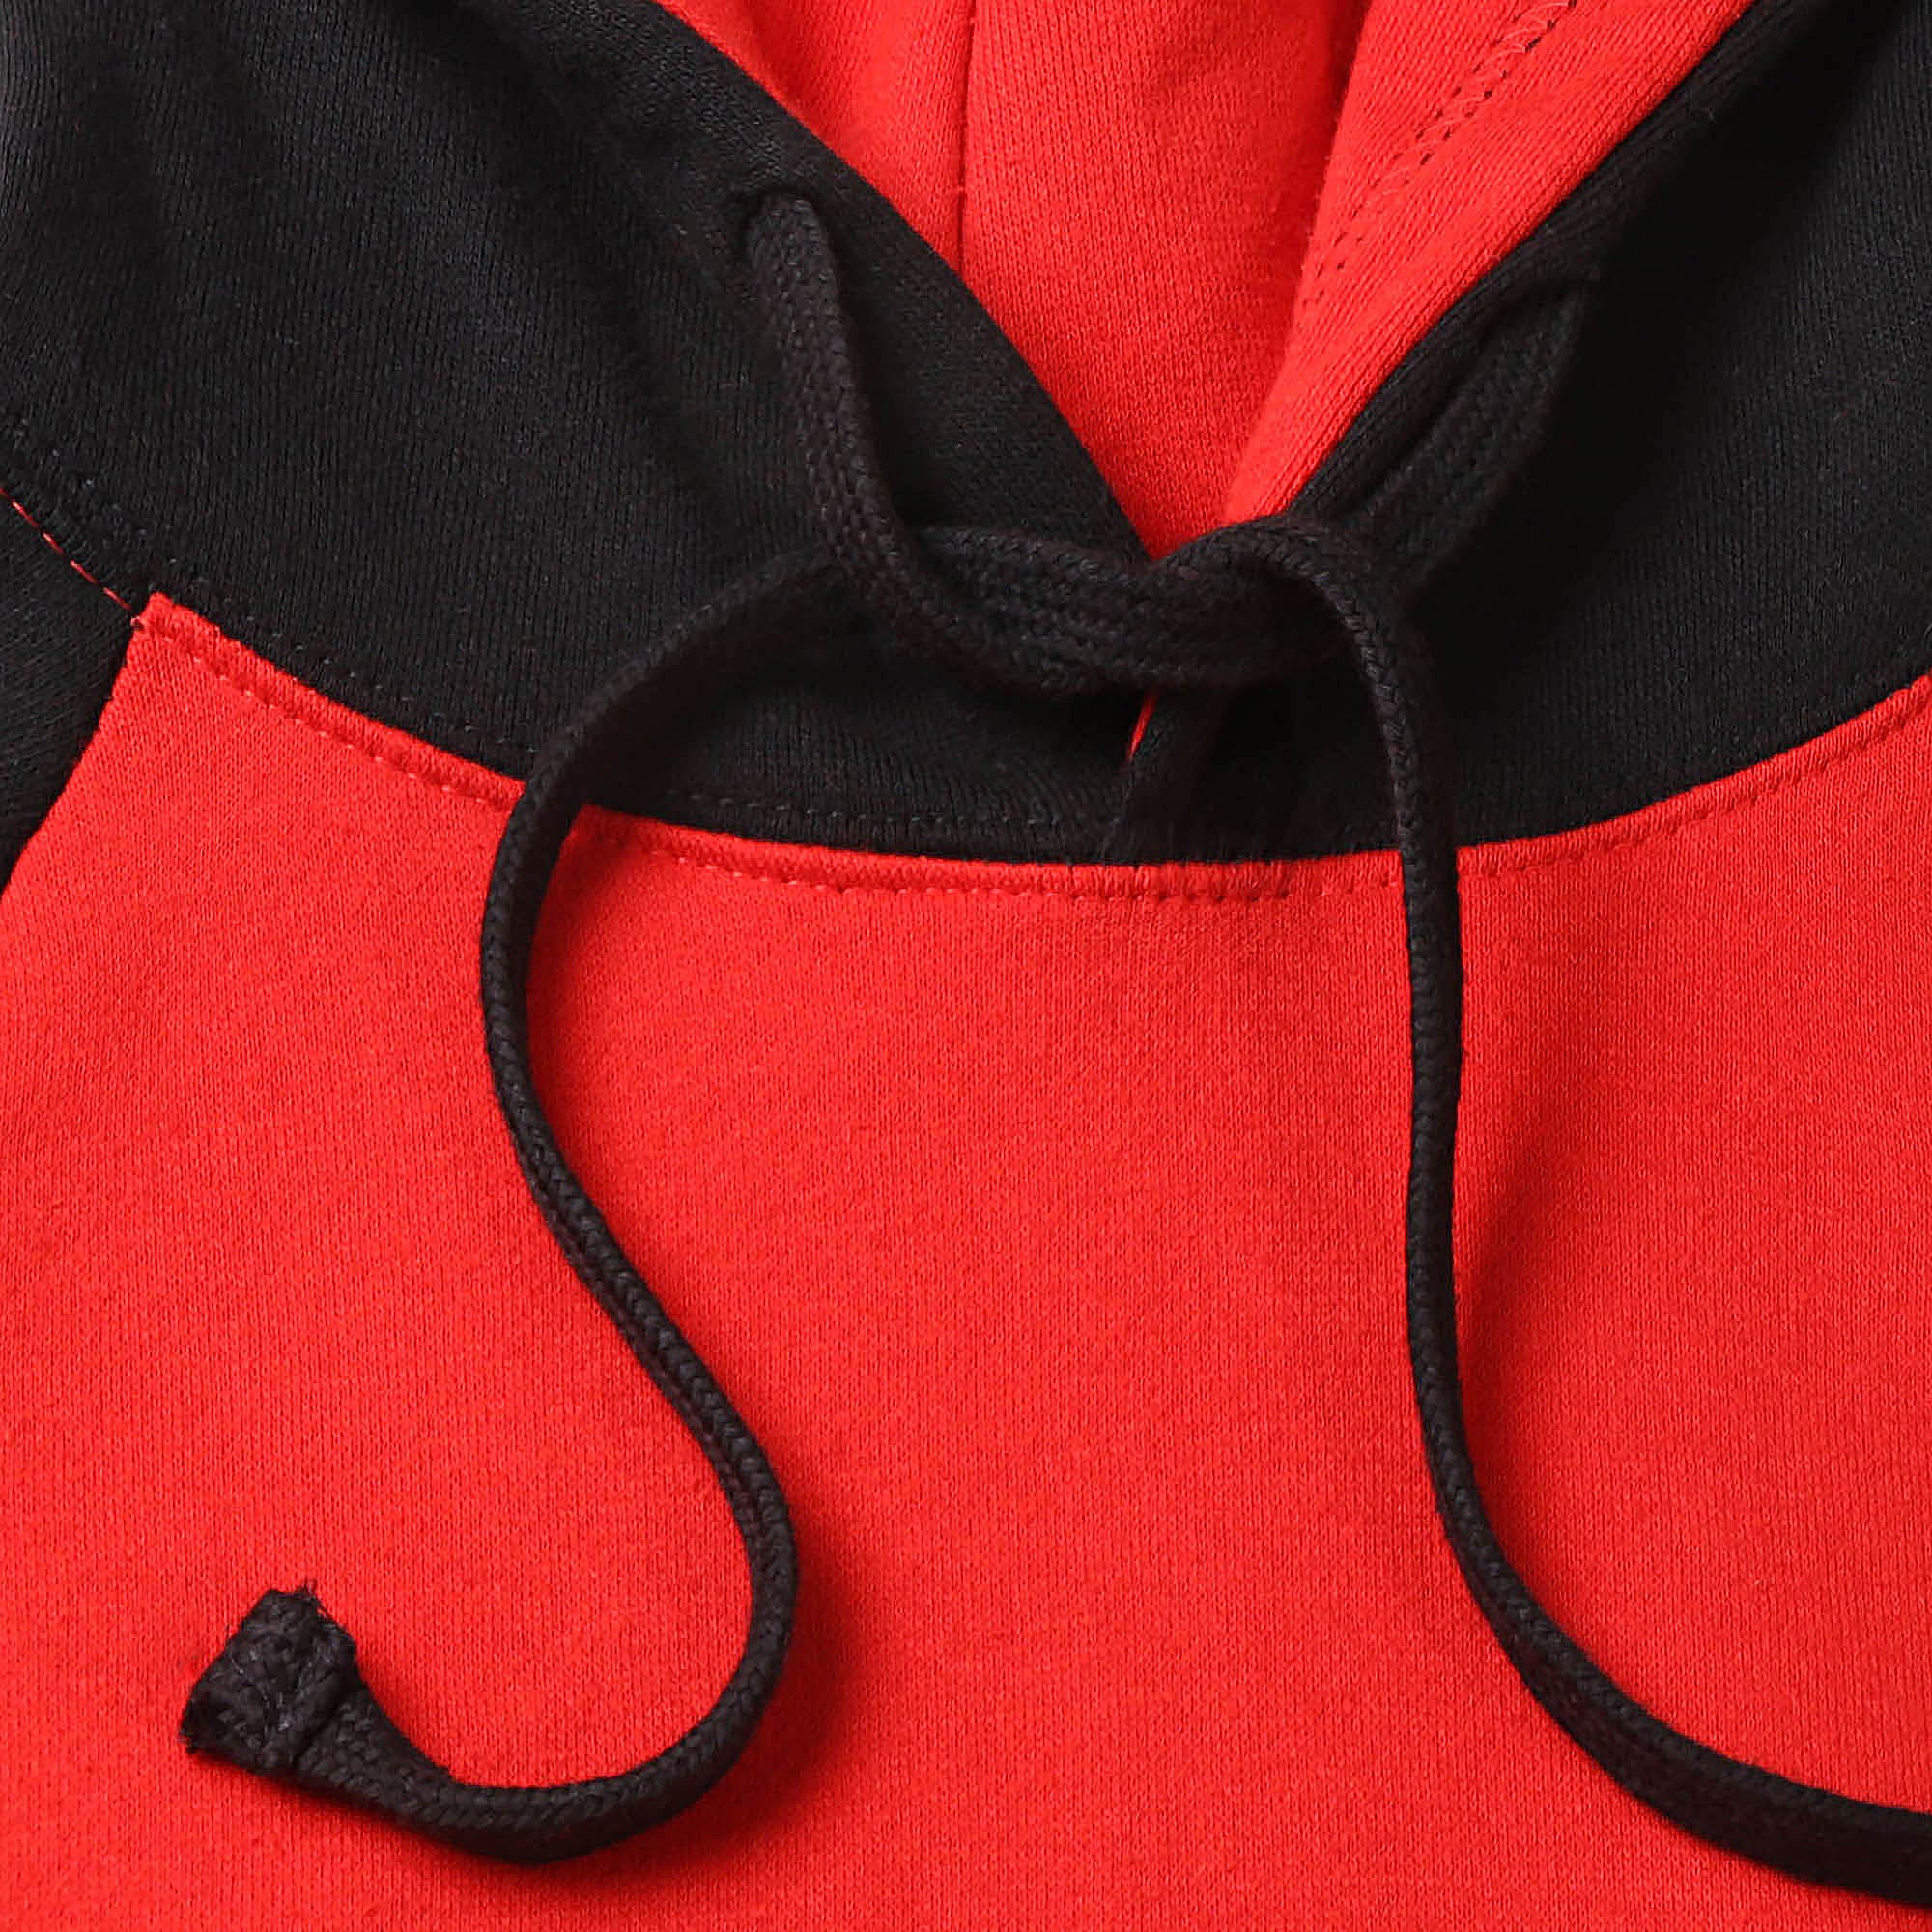 pullover hoodie_mens pullover hoodie_pullover sweatshirt_champion pullover hoodie_pullover adidas_hooded pullover_Red/Black